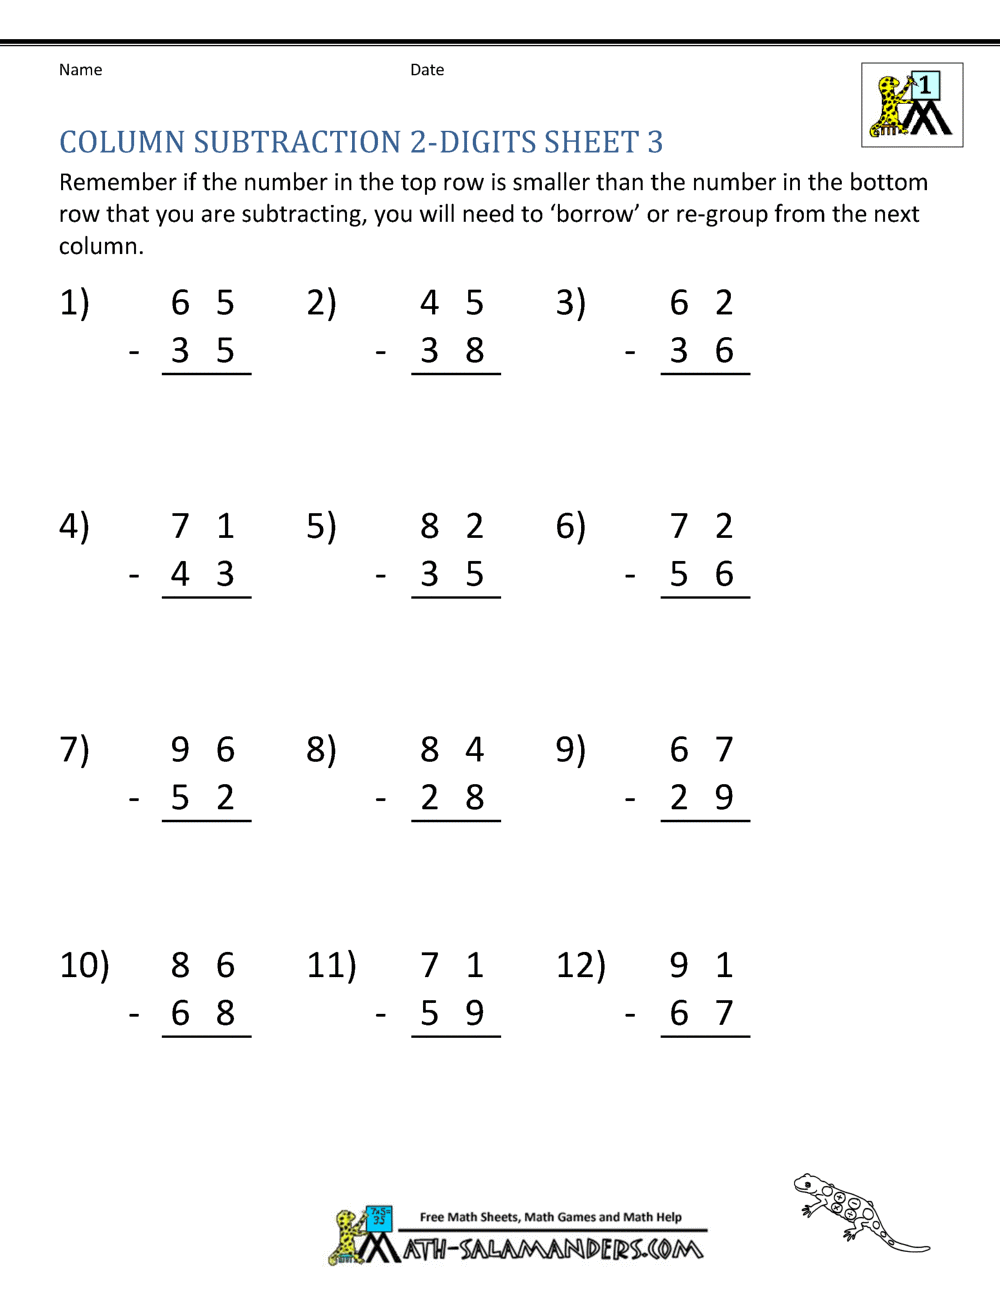 Subtracting From 20 Worksheets